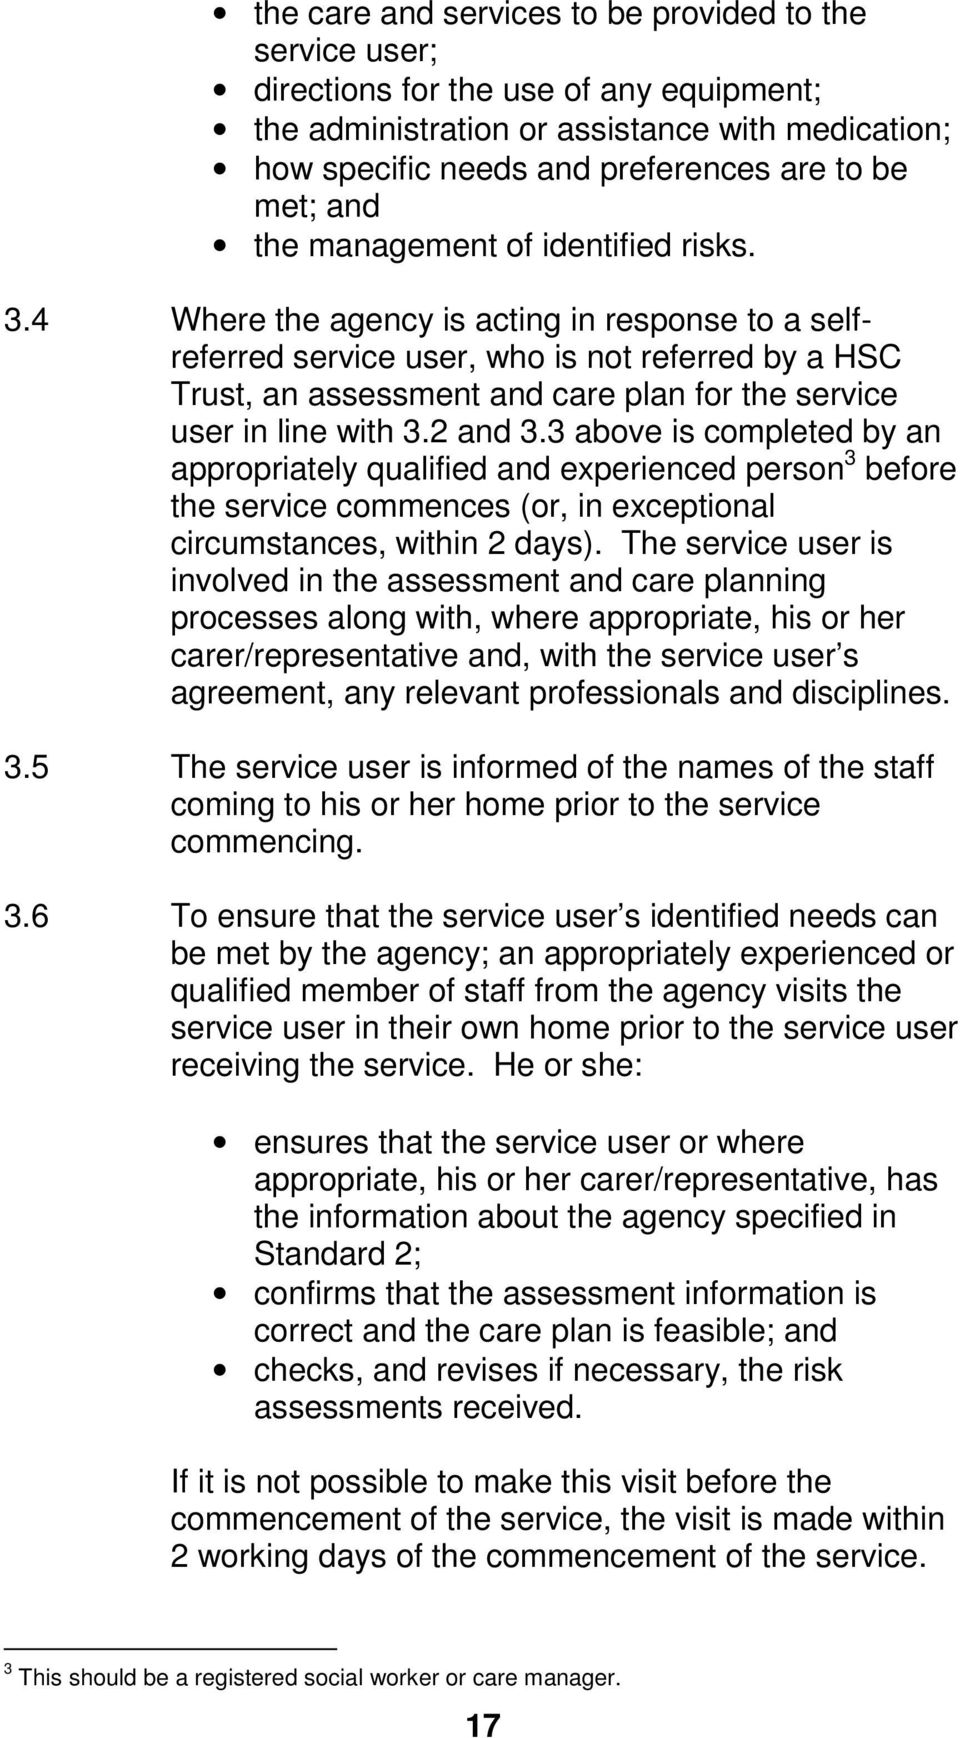 4 Where the agency is acting in response to a selfreferred service user, who is not referred by a HSC Trust, an assessment and care plan for the service user in line with 3.2 and 3.